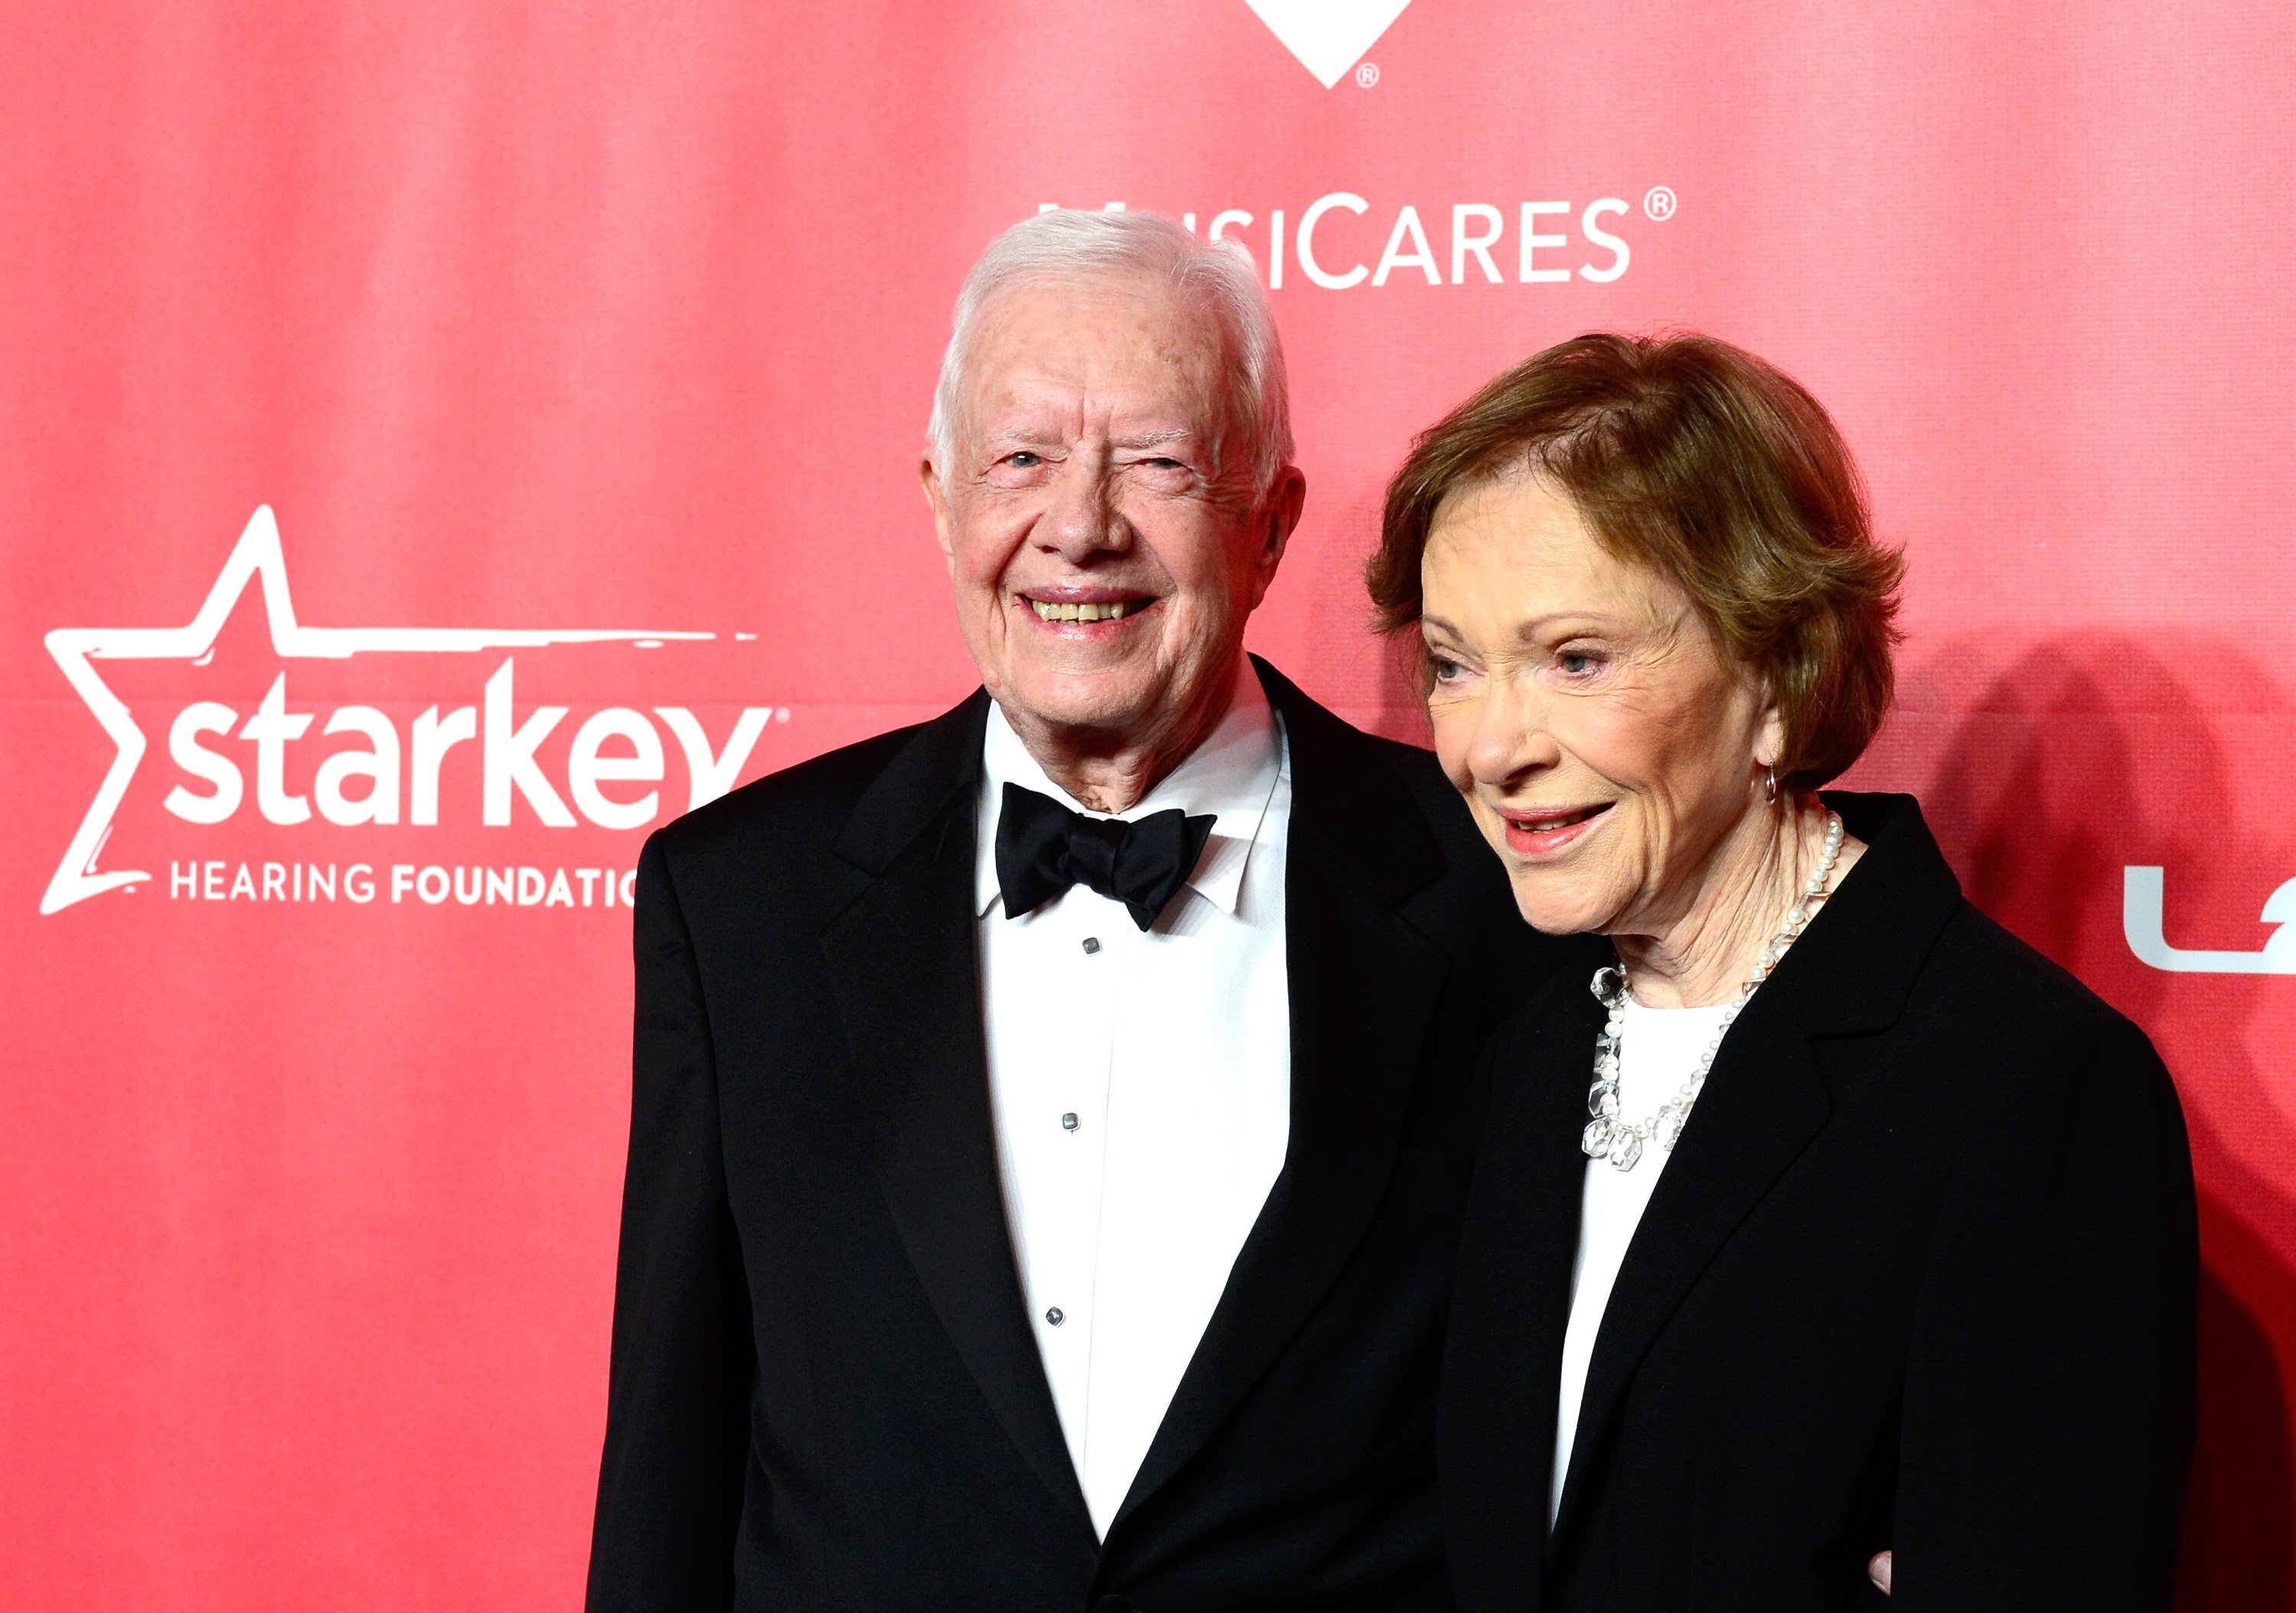 Jimmy Carter  Rosalynn Carter attend the 25th anniversary MusiCares 2015 Person Of The Year Gala at the Los Angeles Convention Center on February 6, 2015, in Los Angeles, California. | Source: Getty Images.